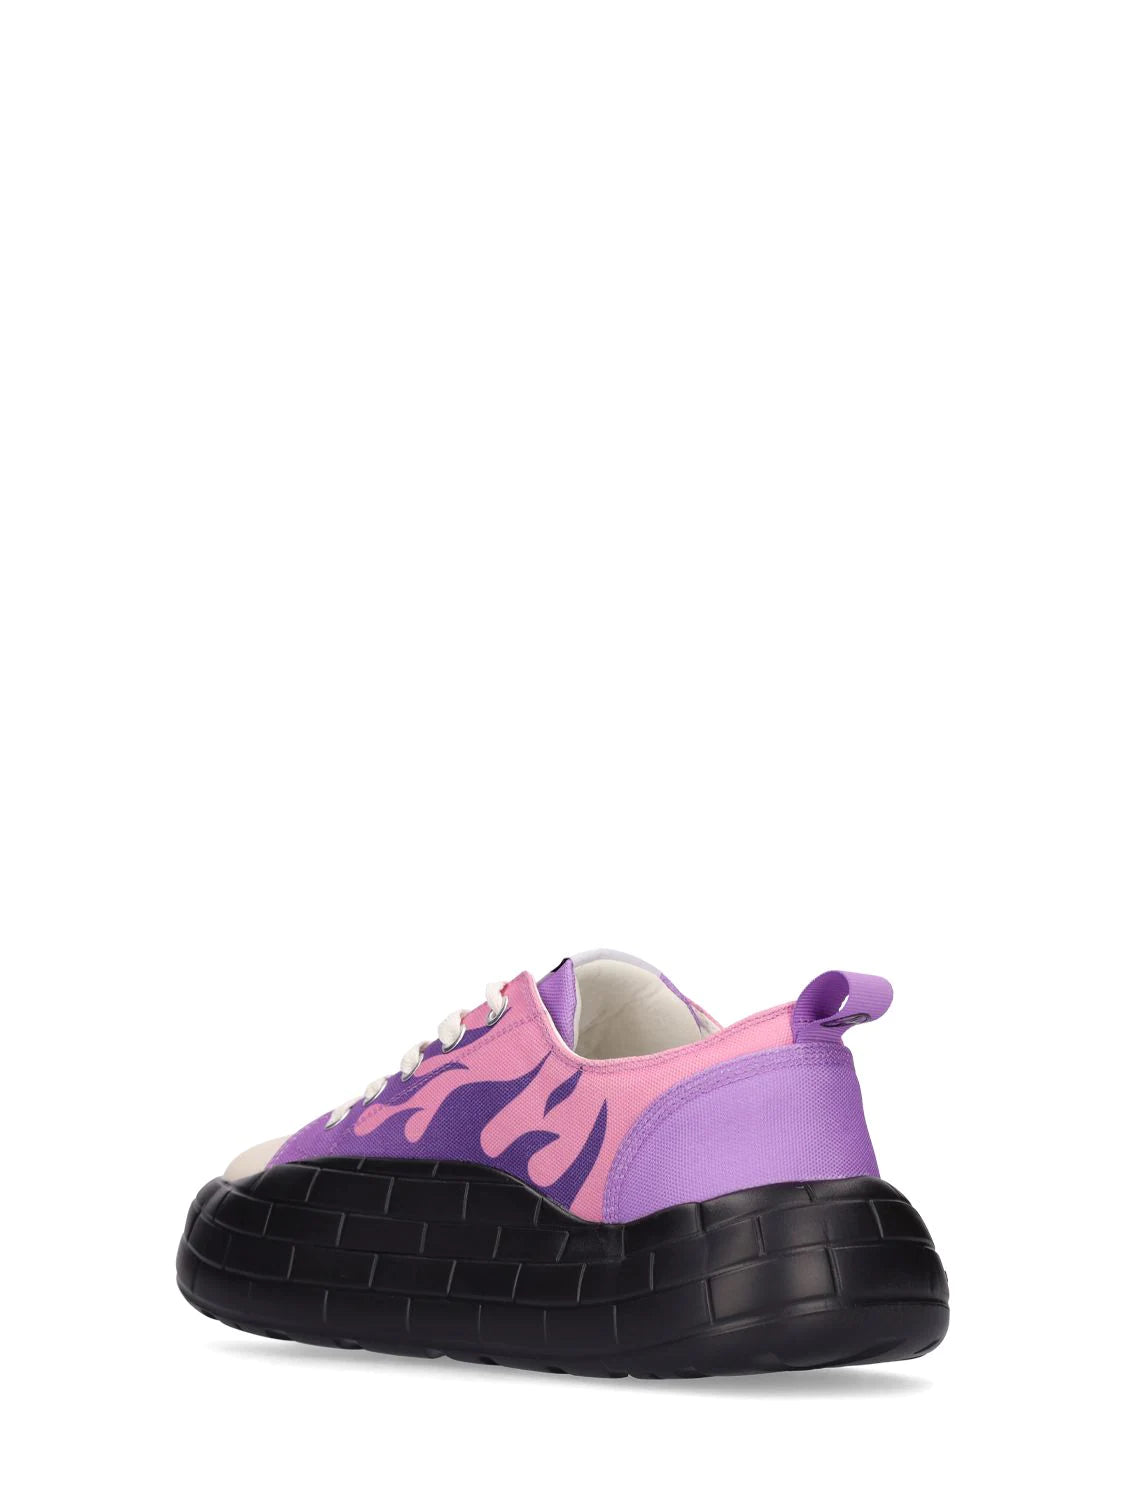 ACUPUNCTURE NYU Vulc Pink/Violet